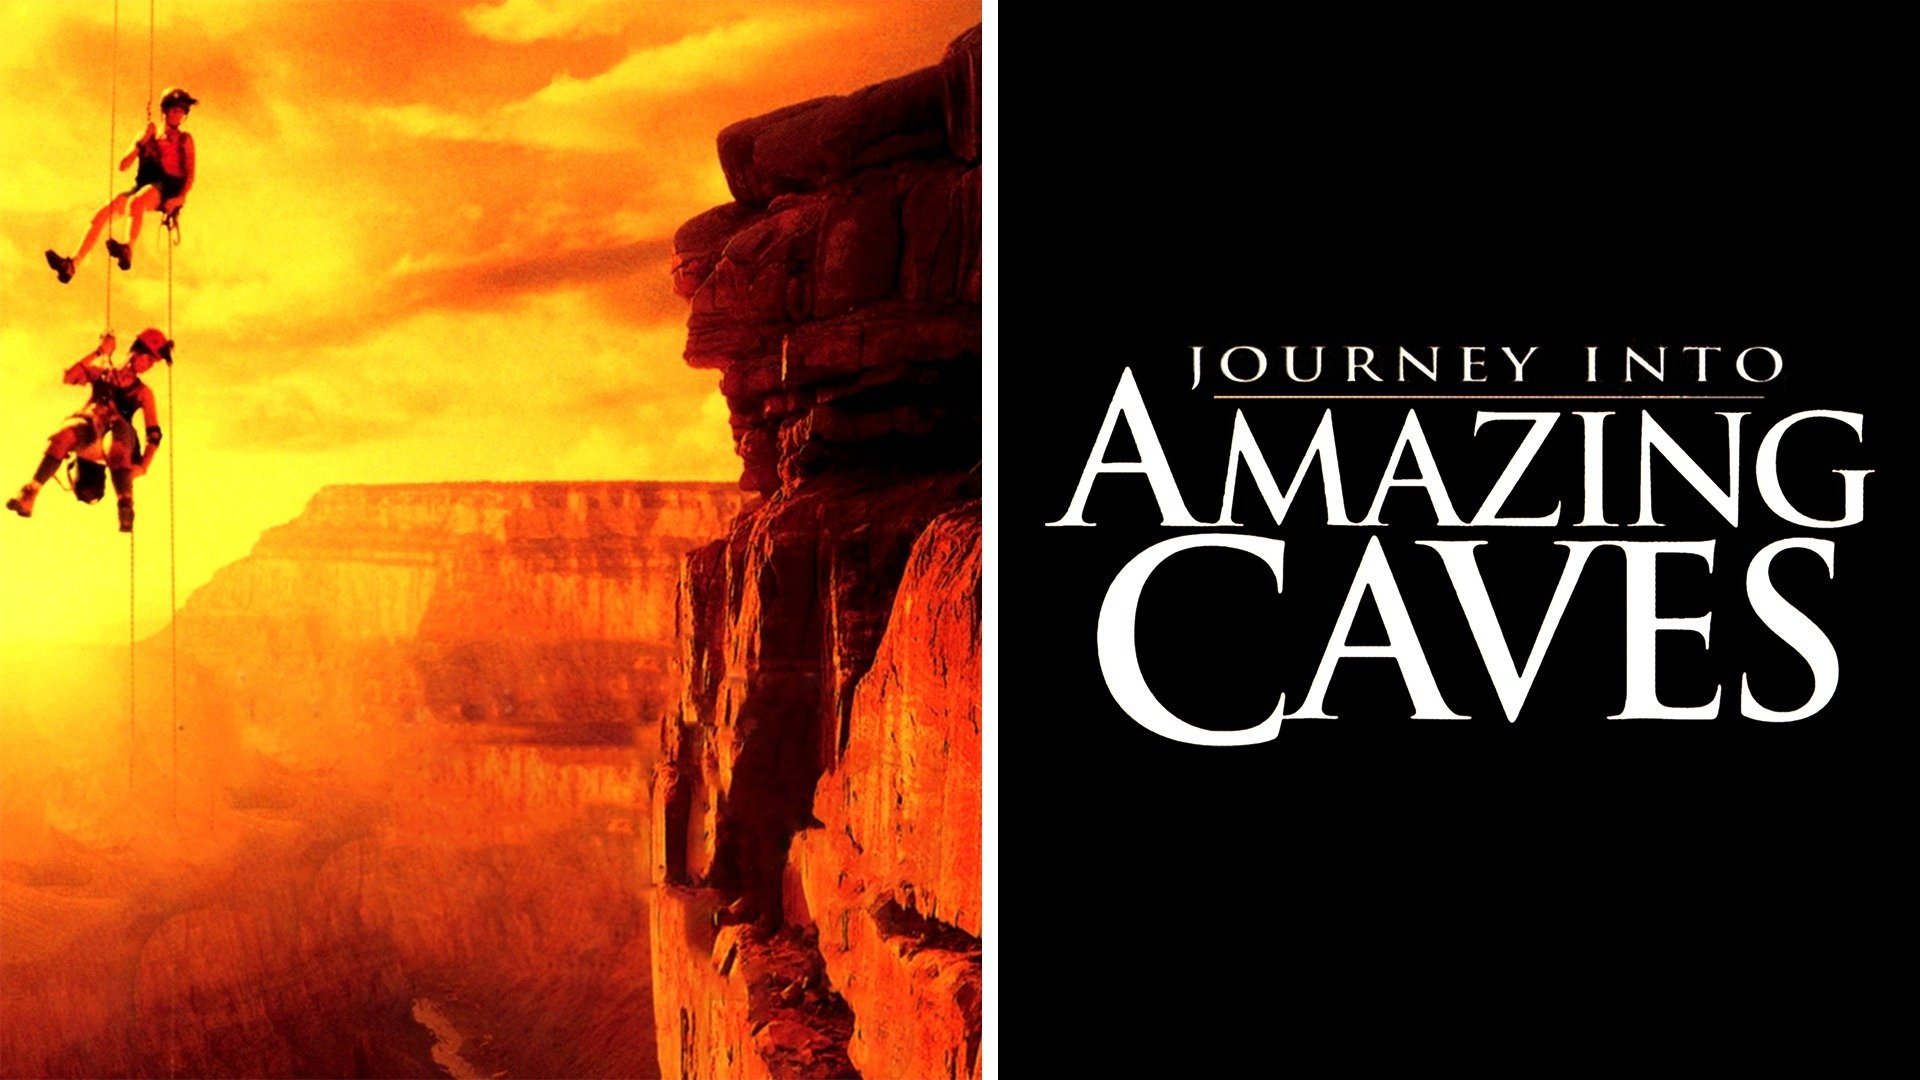 Journey Into Amazing Caves - Rotten Tomatoes